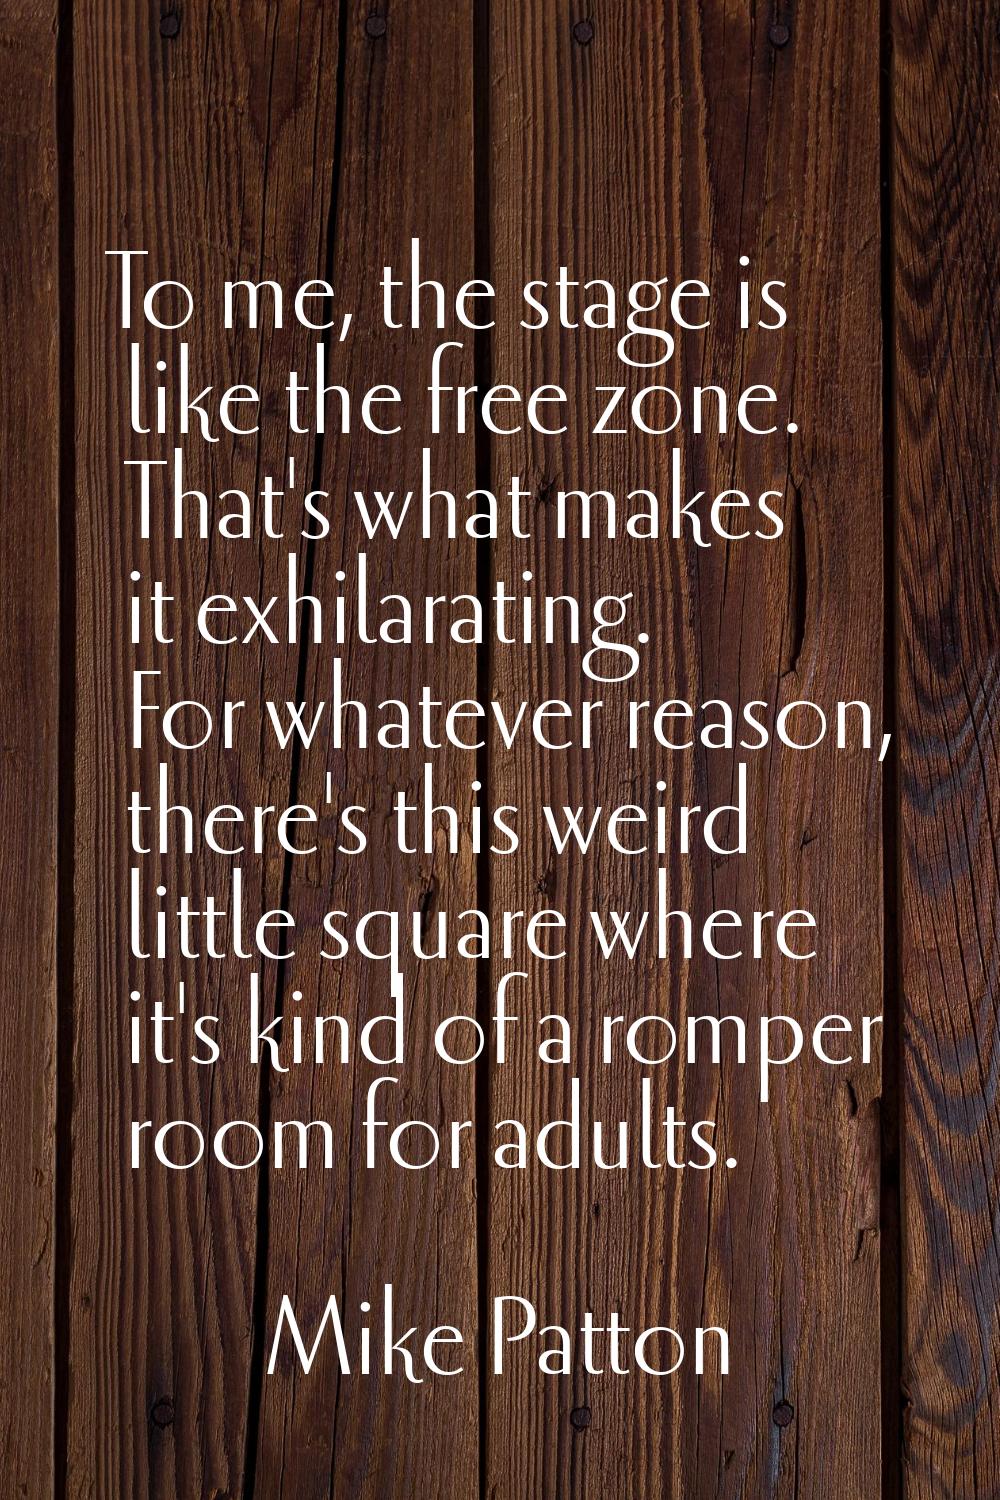 To me, the stage is like the free zone. That's what makes it exhilarating. For whatever reason, the